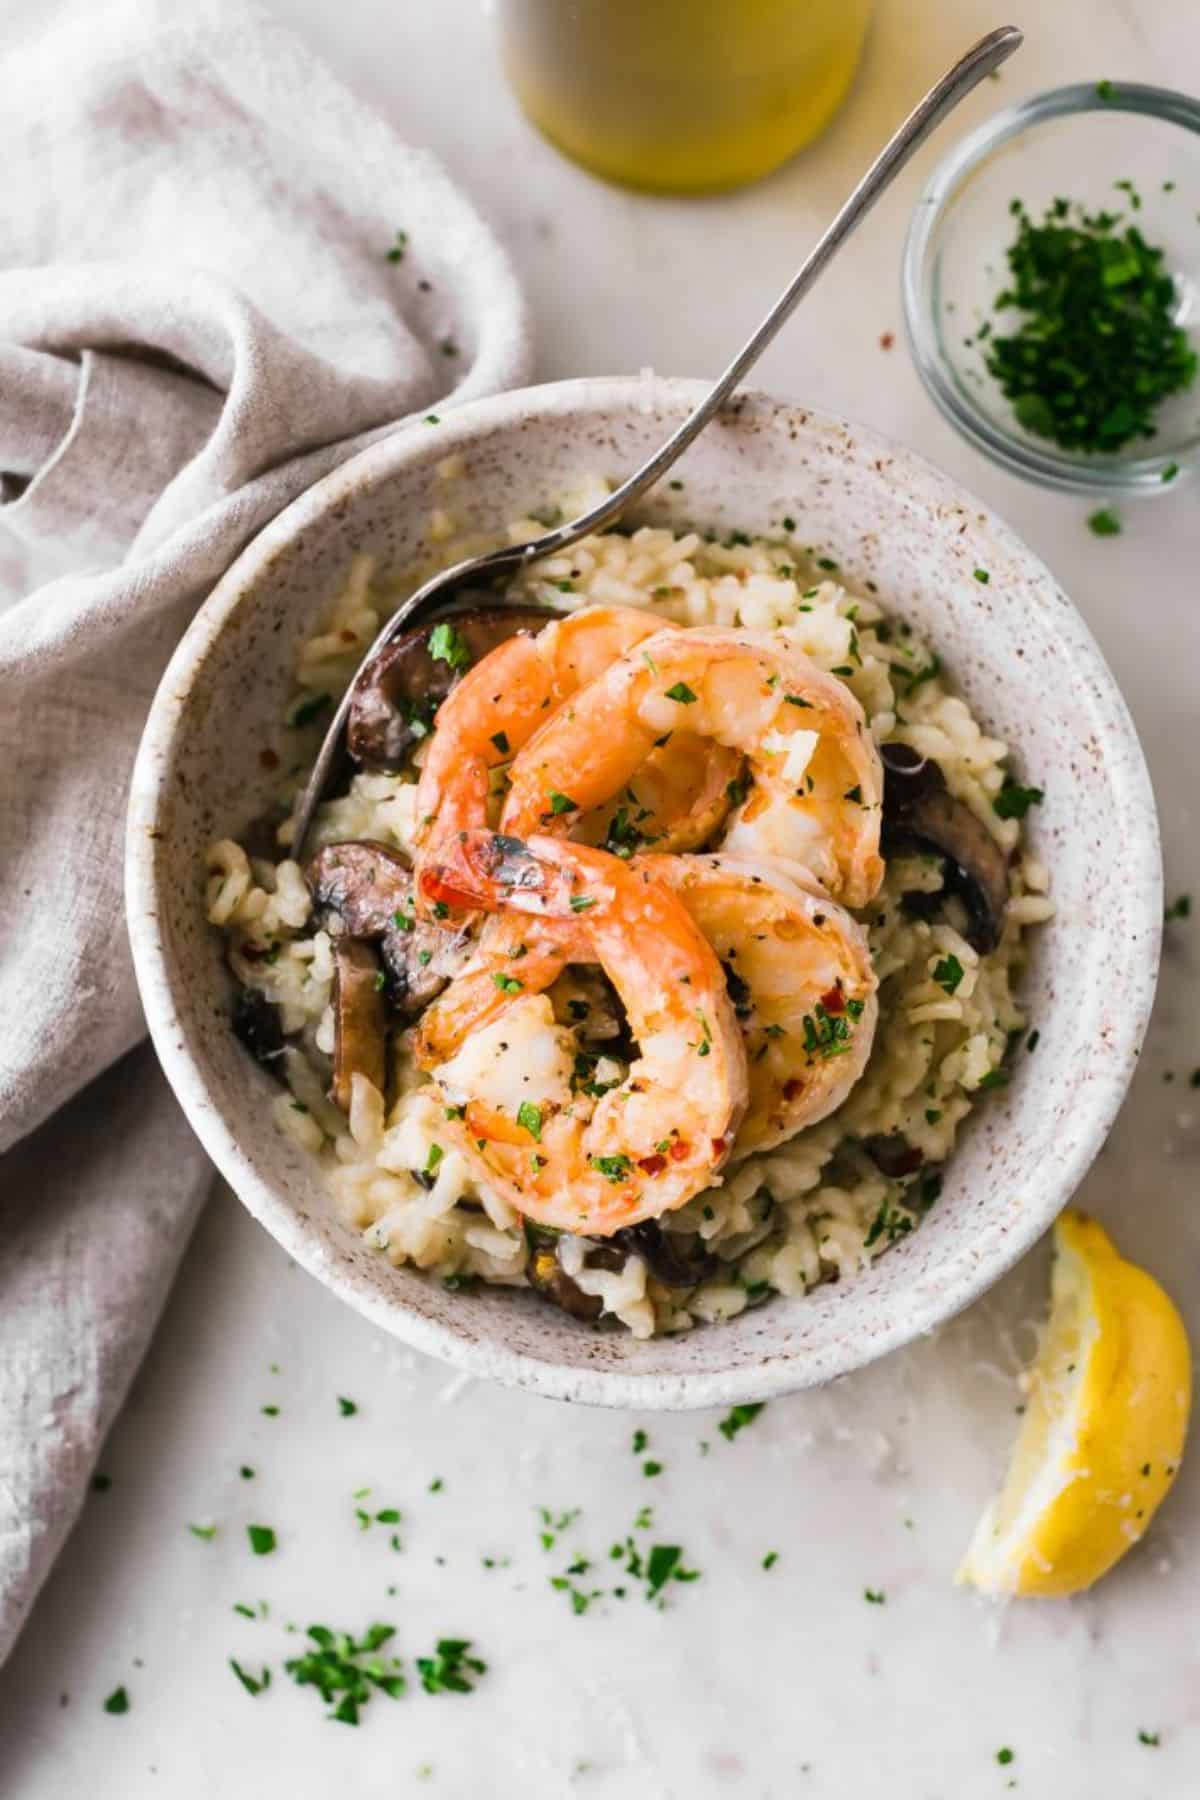 Flavorful mushroom parmesan shrimp risotto in a bowl with a spoon.